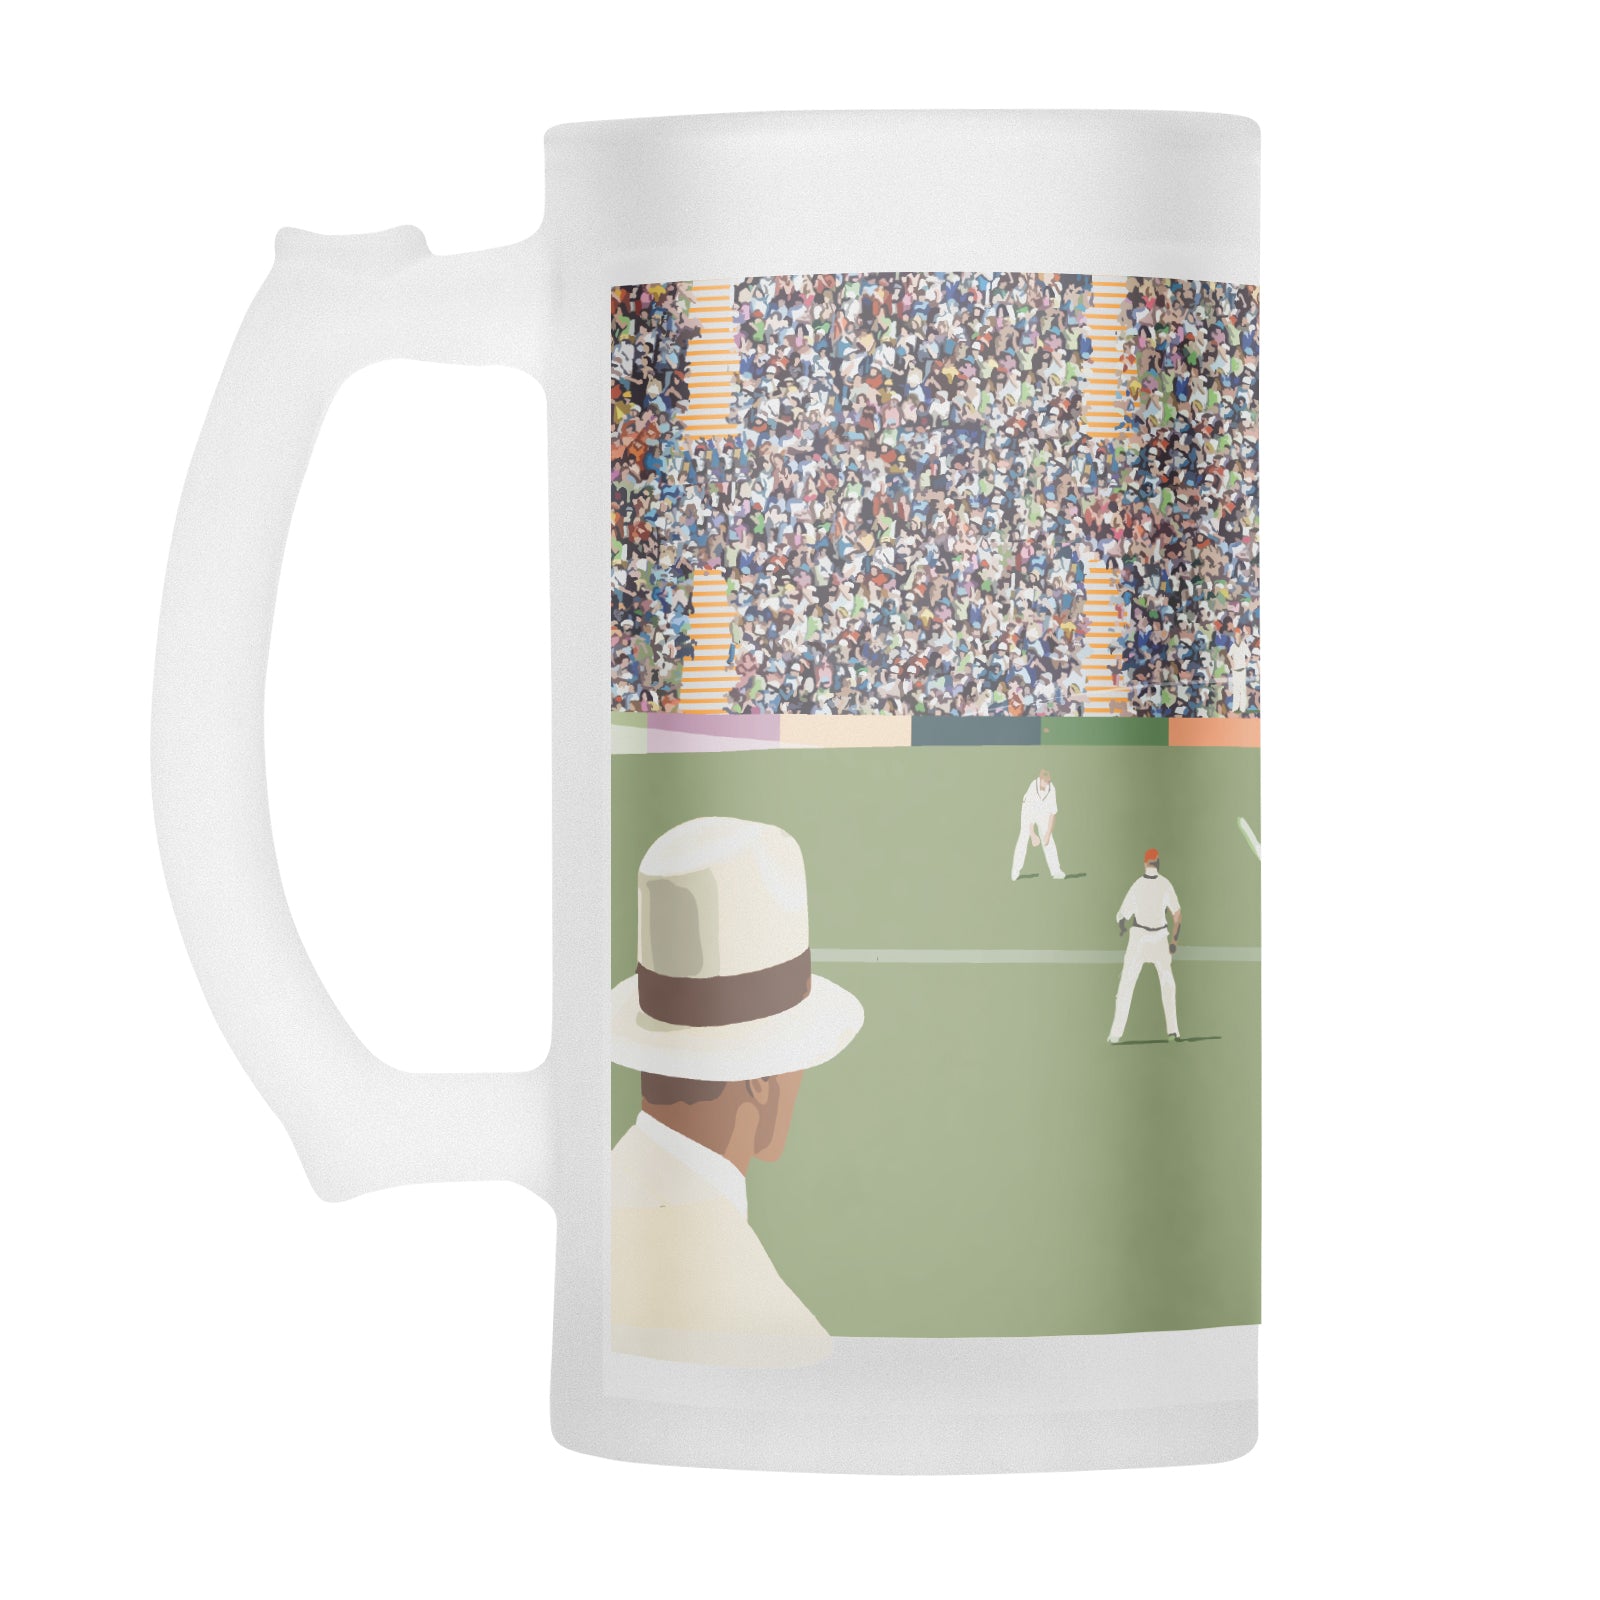 Cricket illustration with cricketers on the pitch with stadium in the background and panama hat man in the corner, printed onto a frosted glass beer stein from Mustard and Gray